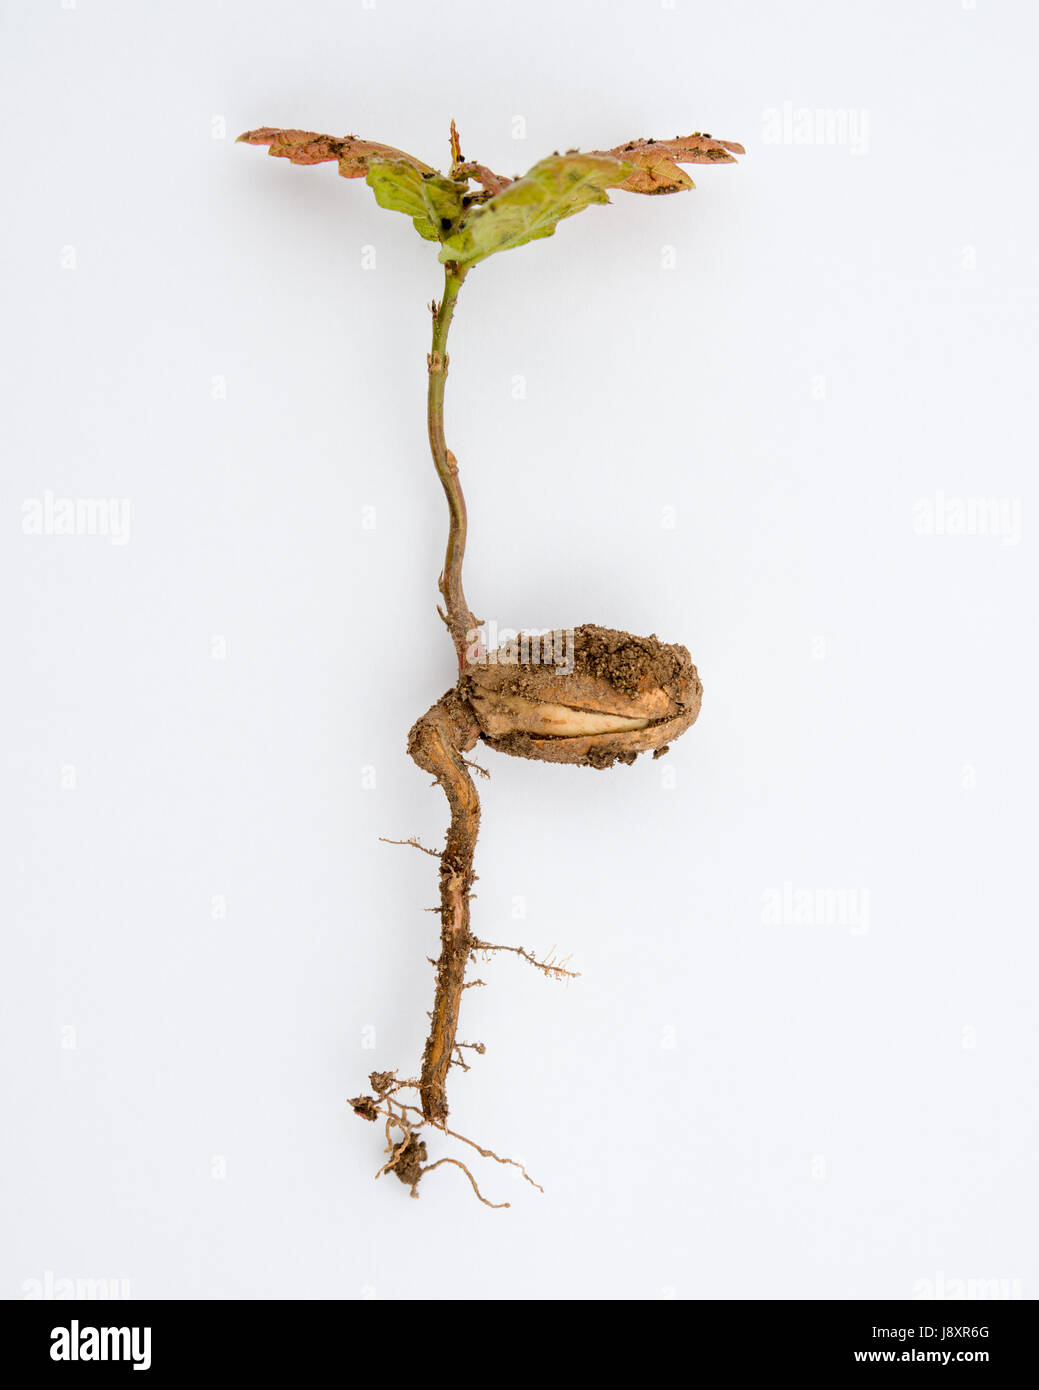 A sprouting Oak (Quercus) acorn on white background. Displayed are leafs, foliage, stem, splitting acorn nut and root system. Stock Photo